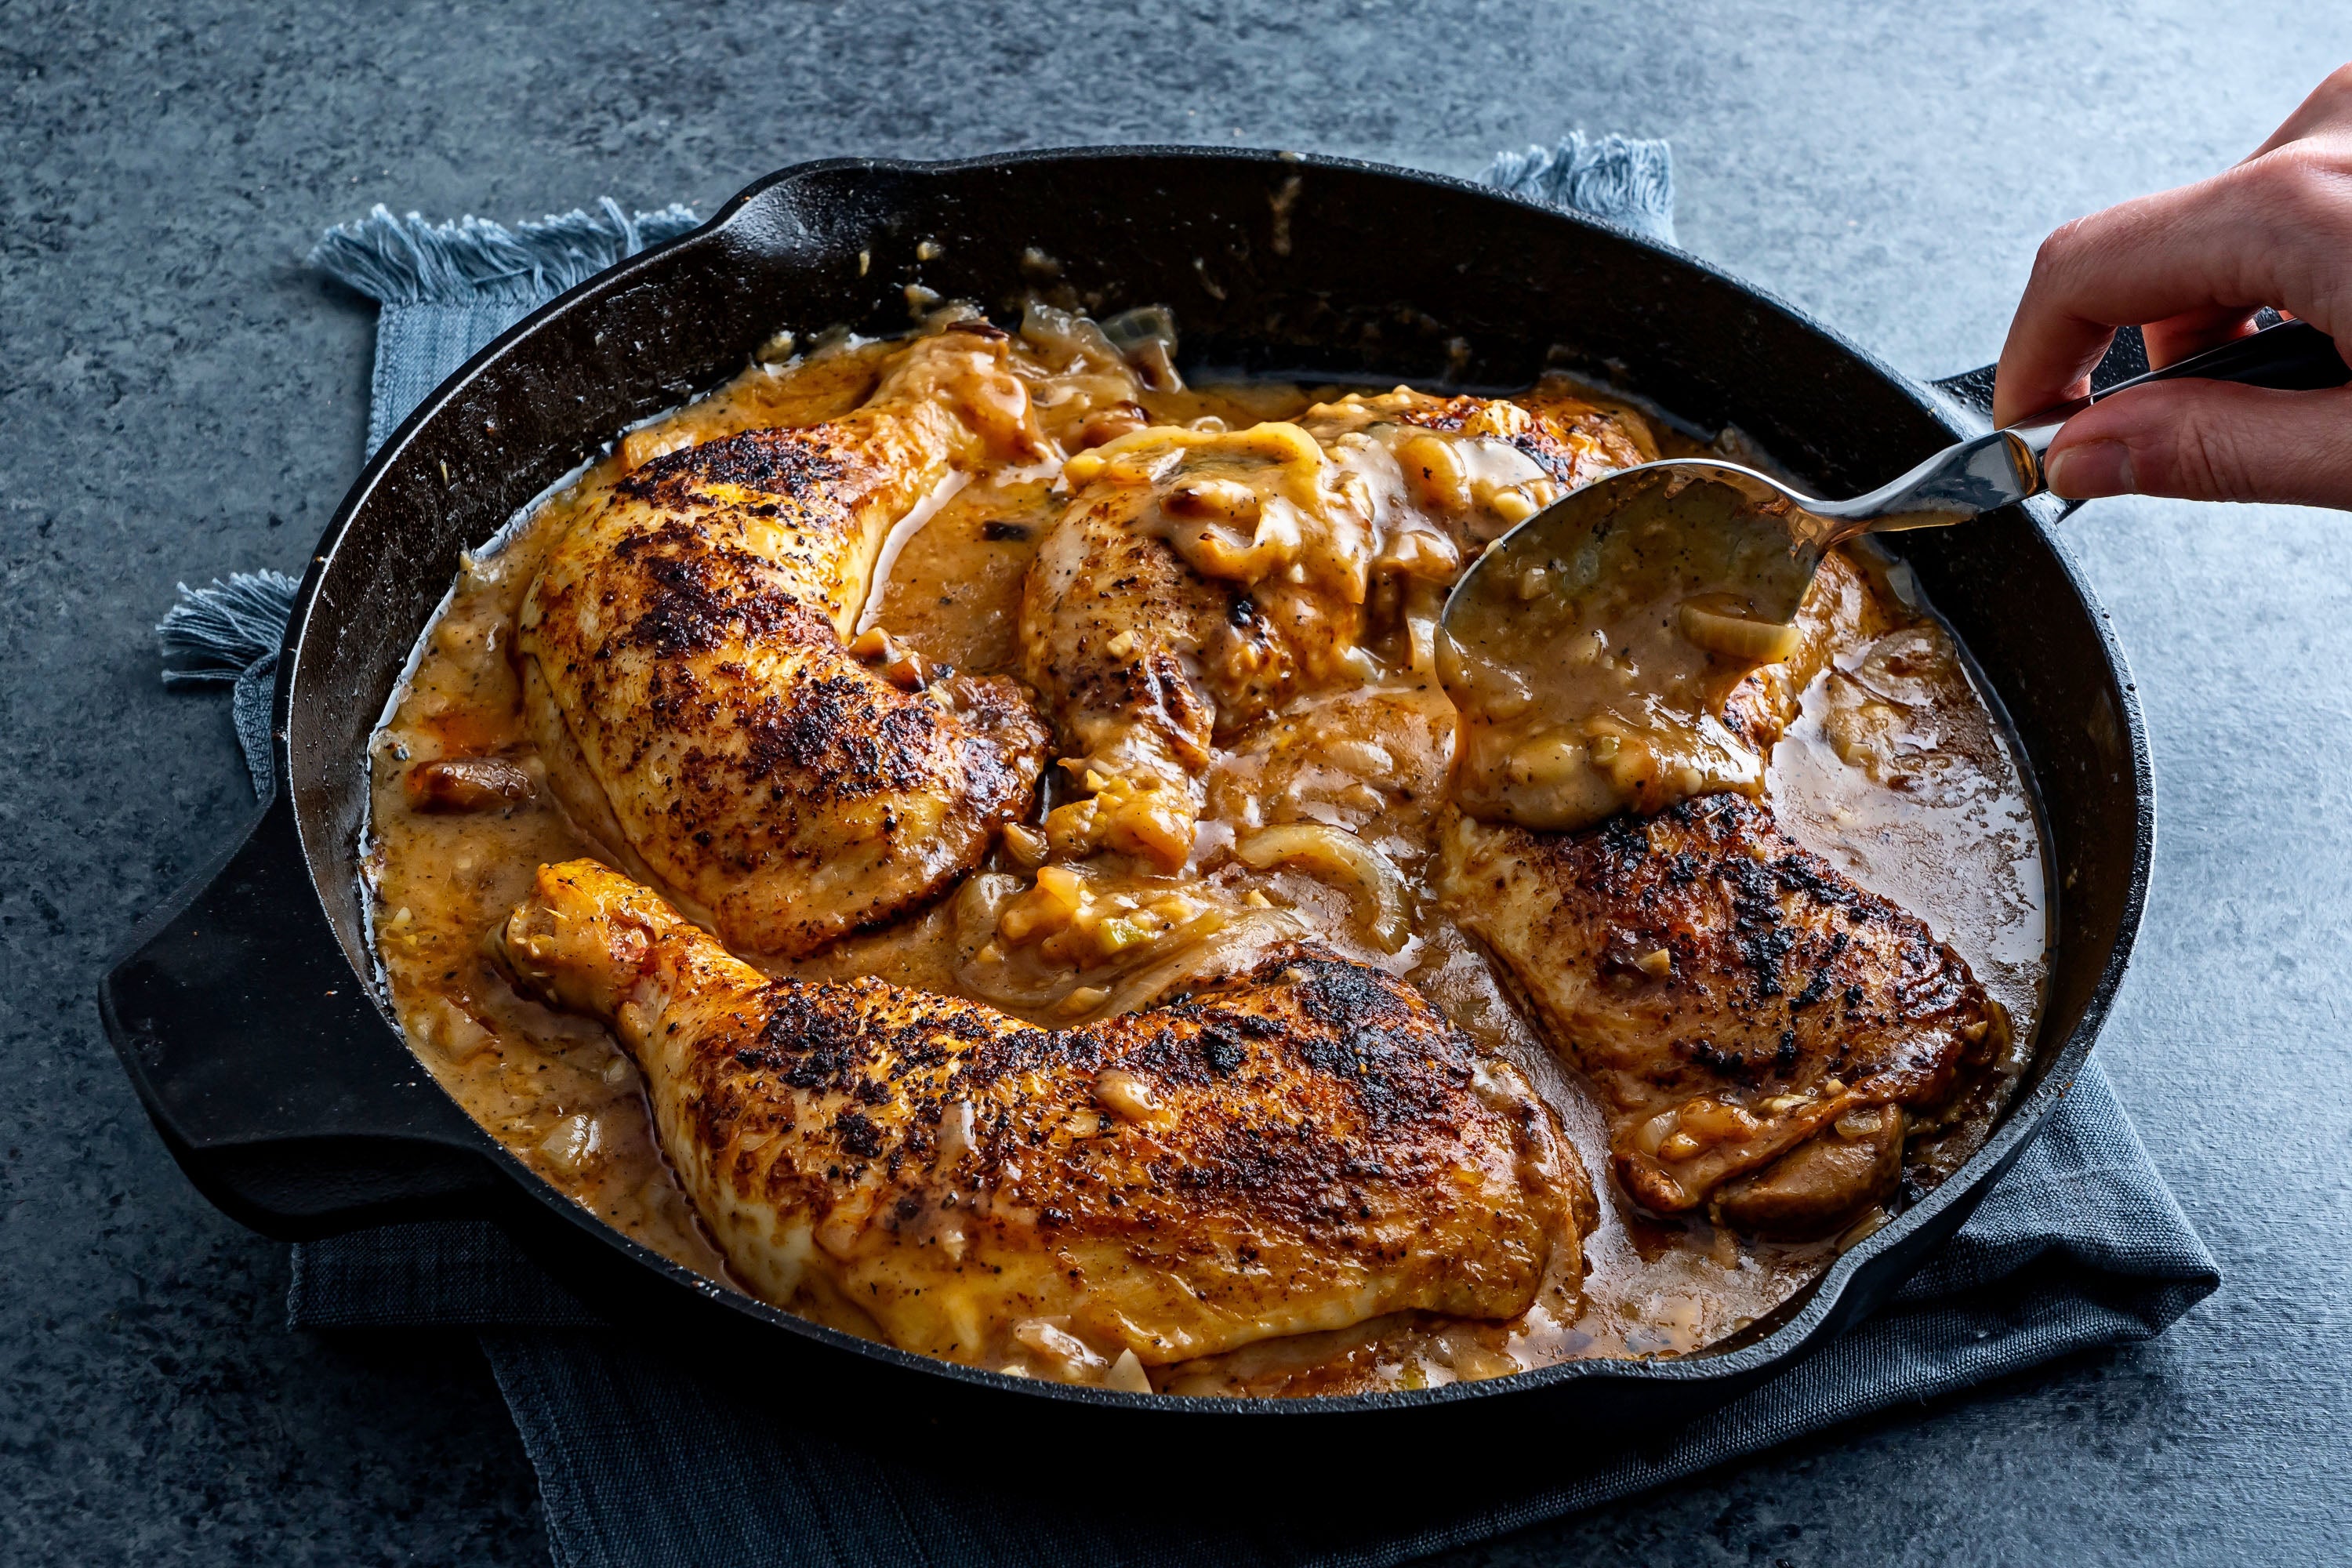 There are as many iterations of smothered chicken as there are cooks, and you can’t go wrong once you have the basic steps and fundamentals down